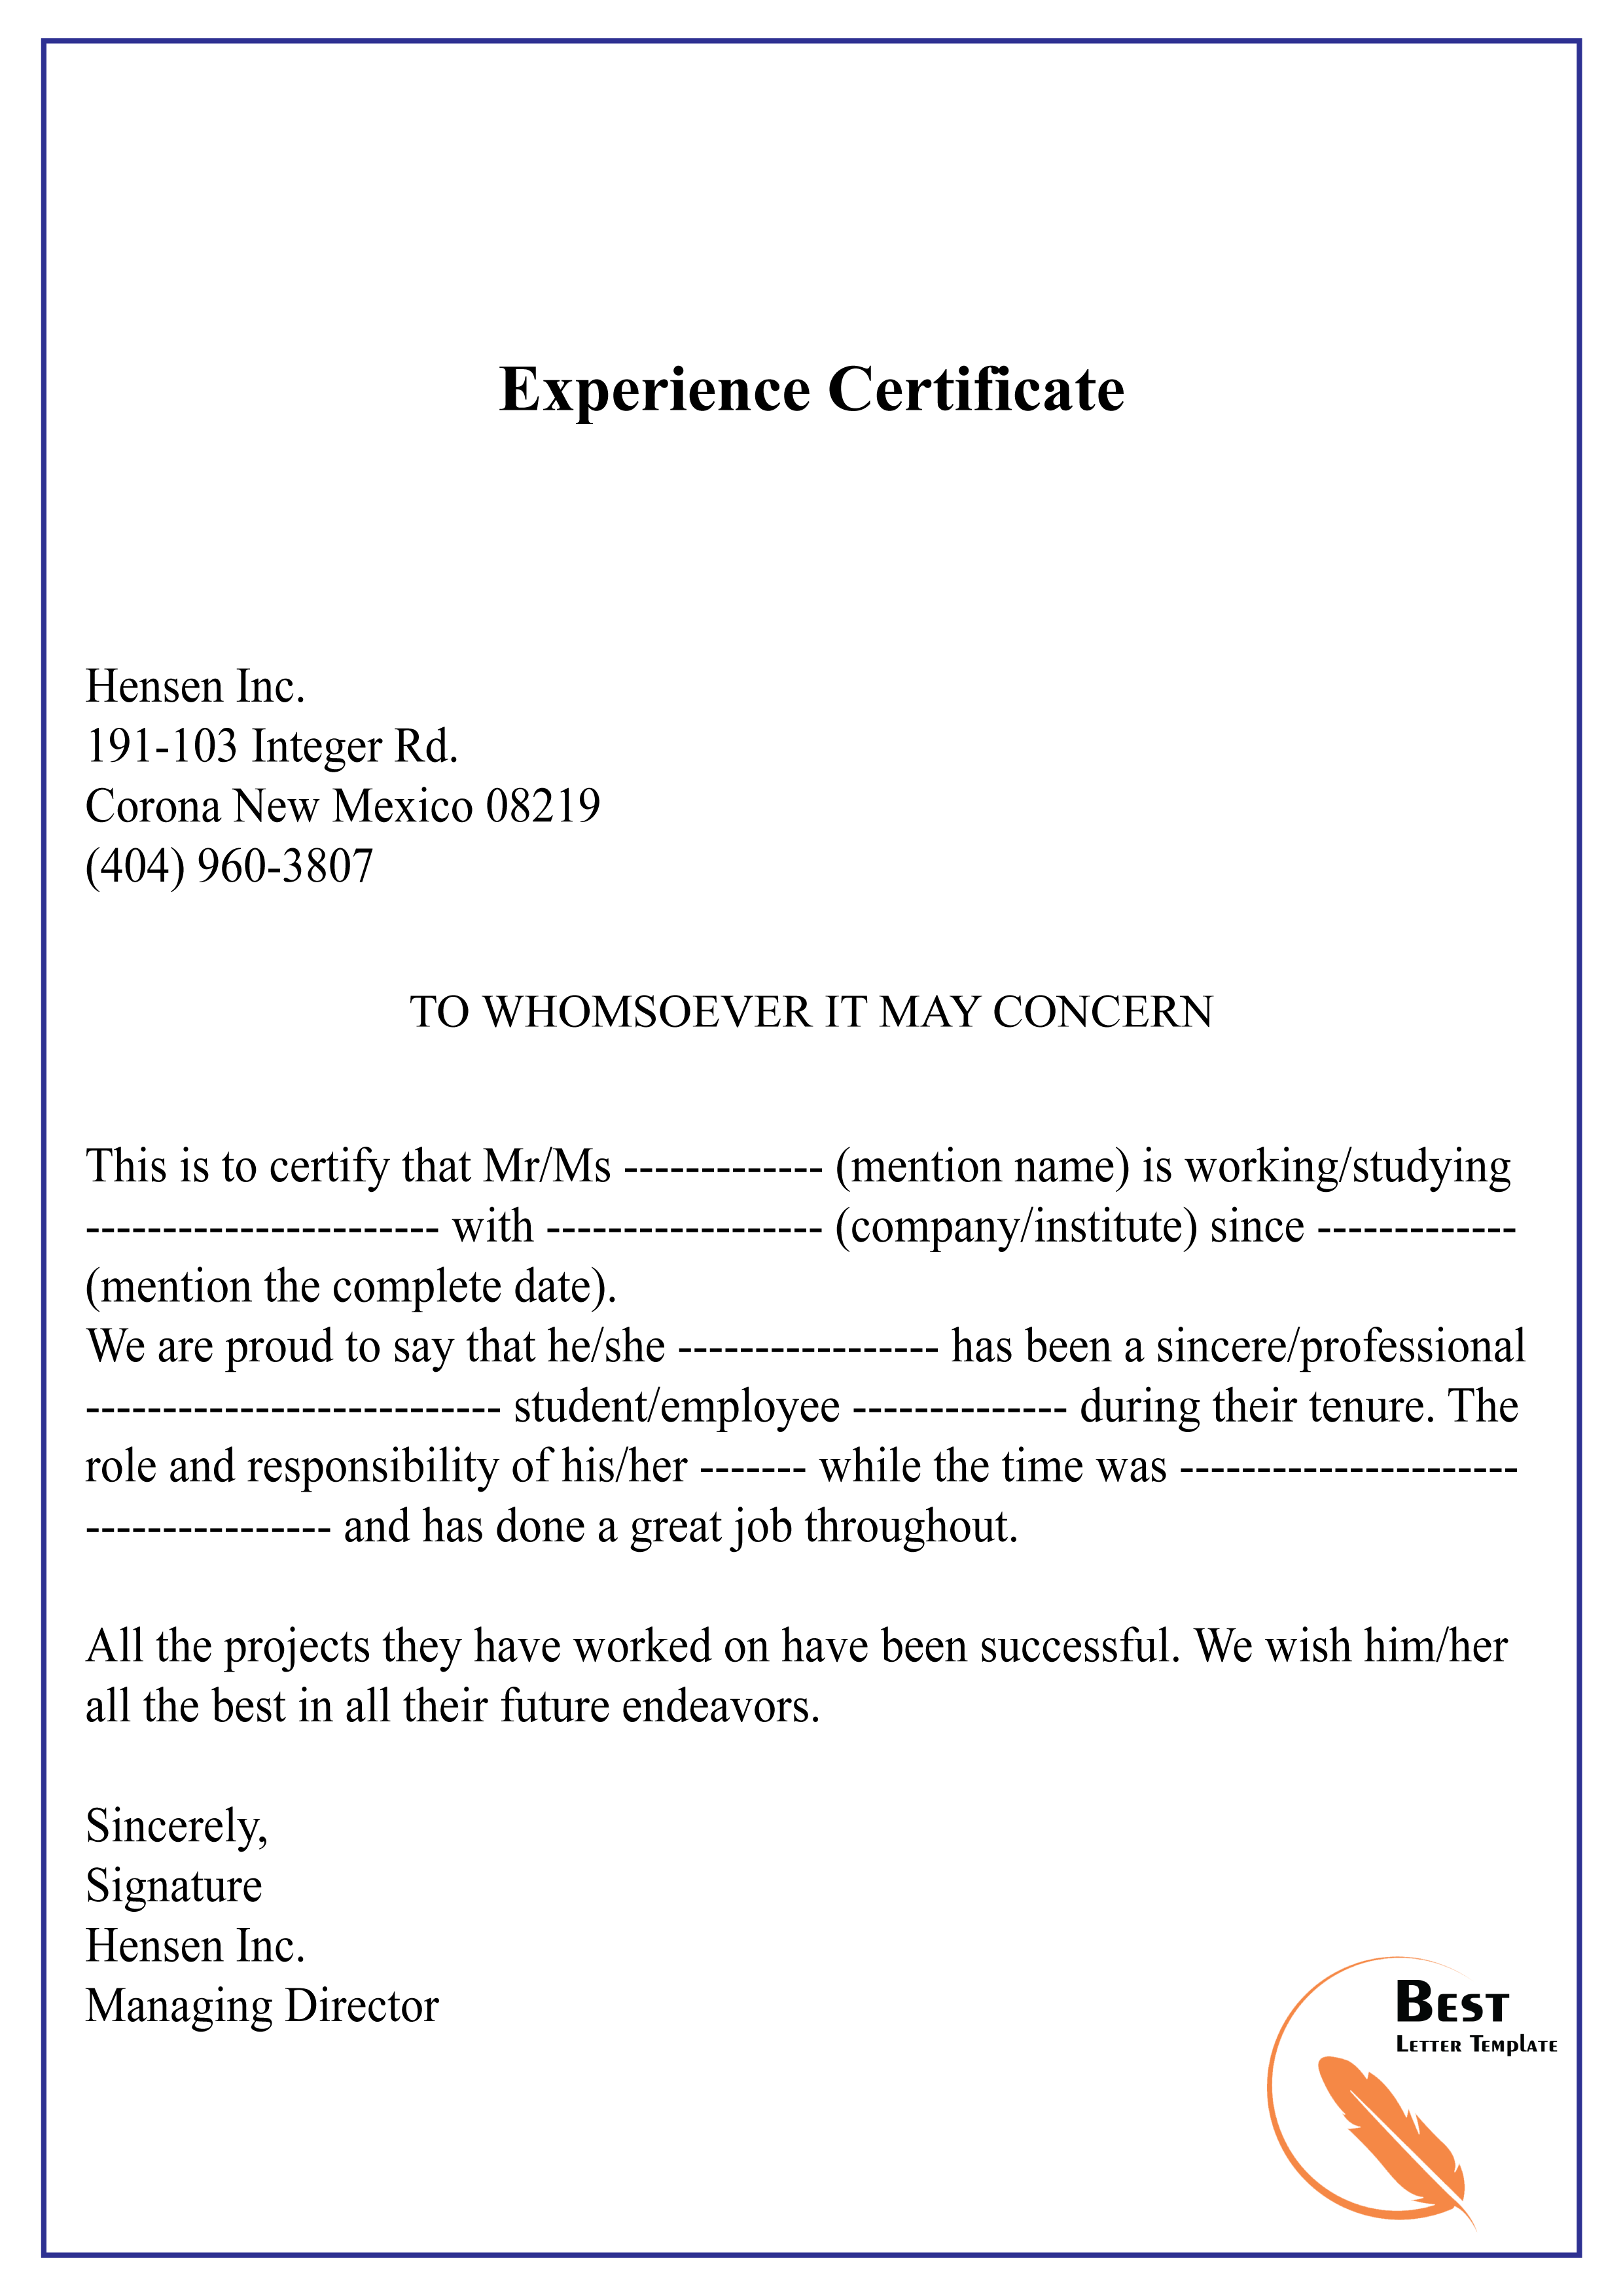 application letter for experience certificate to hr